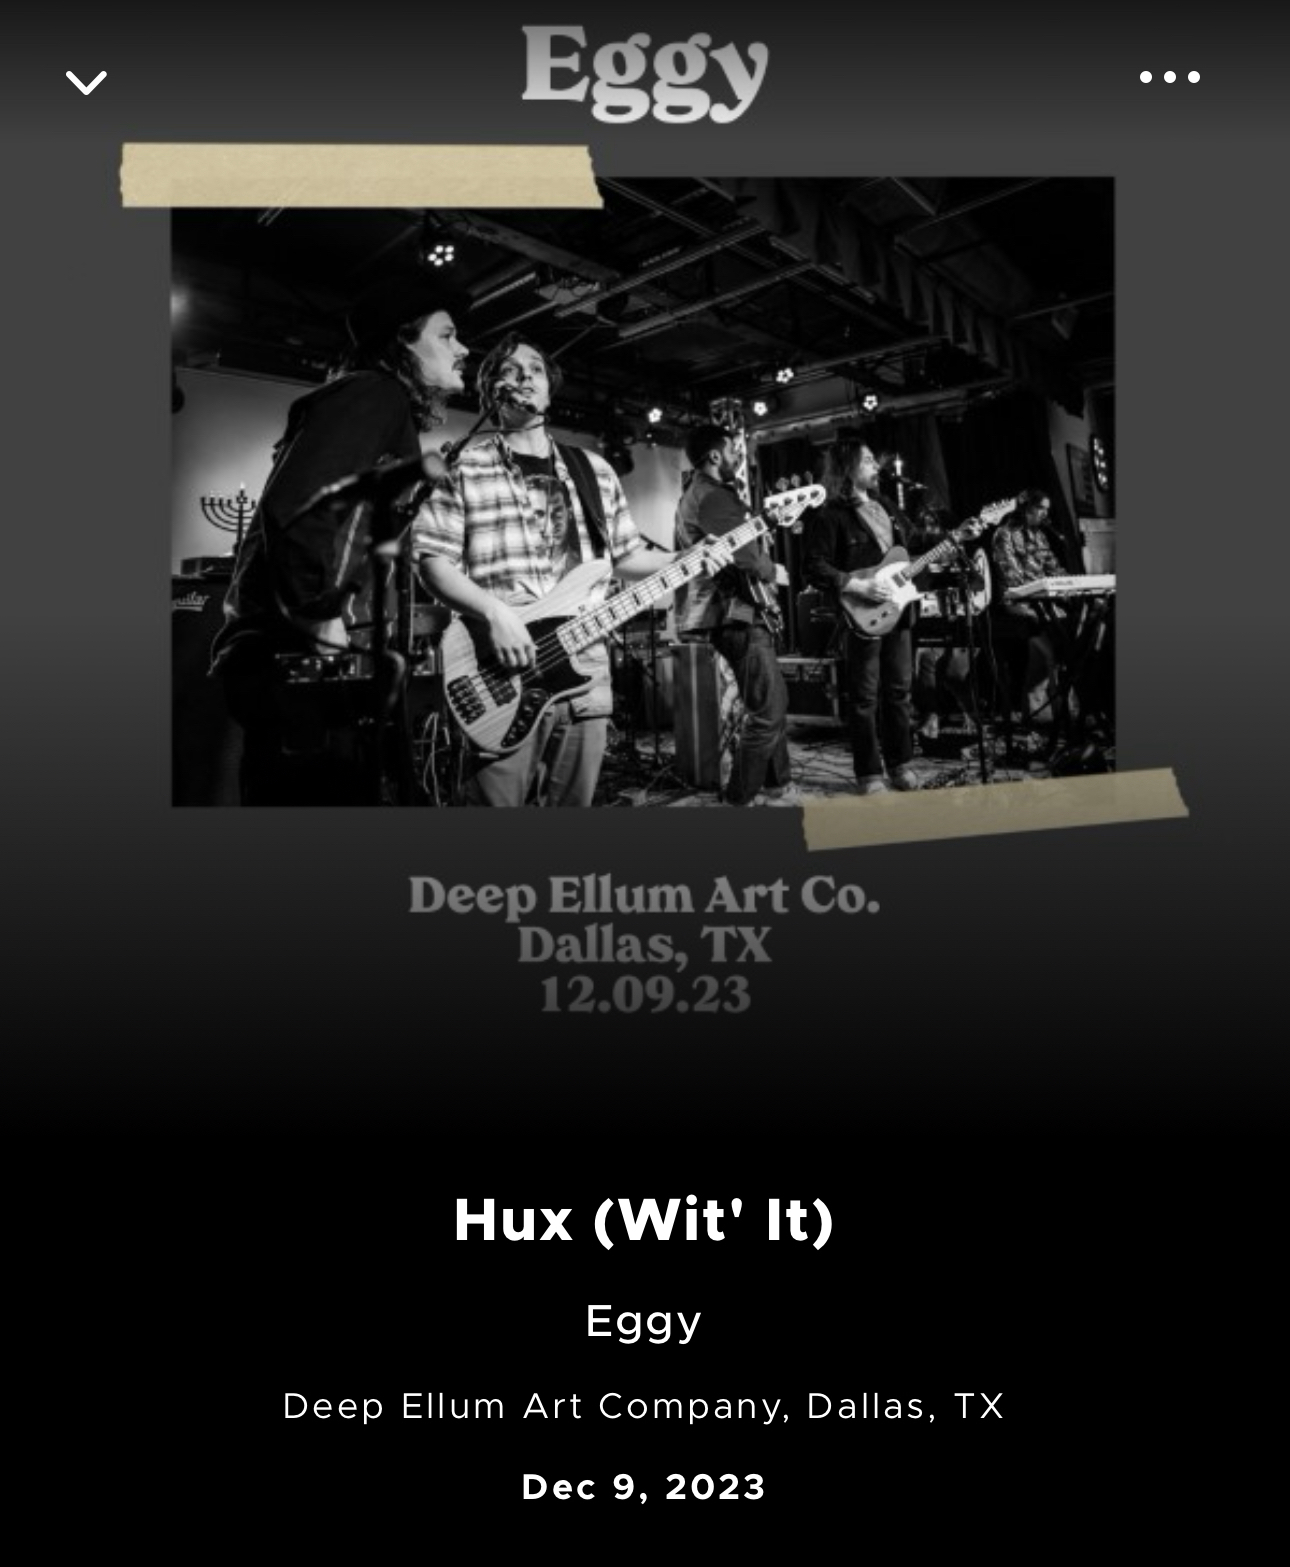 A black and white photo of a band called Eggy performing live on stage at Deep Ellum Art Company in Dallas, TX on December 9, 2023, with event details and the song title “Hux (Wit' It)